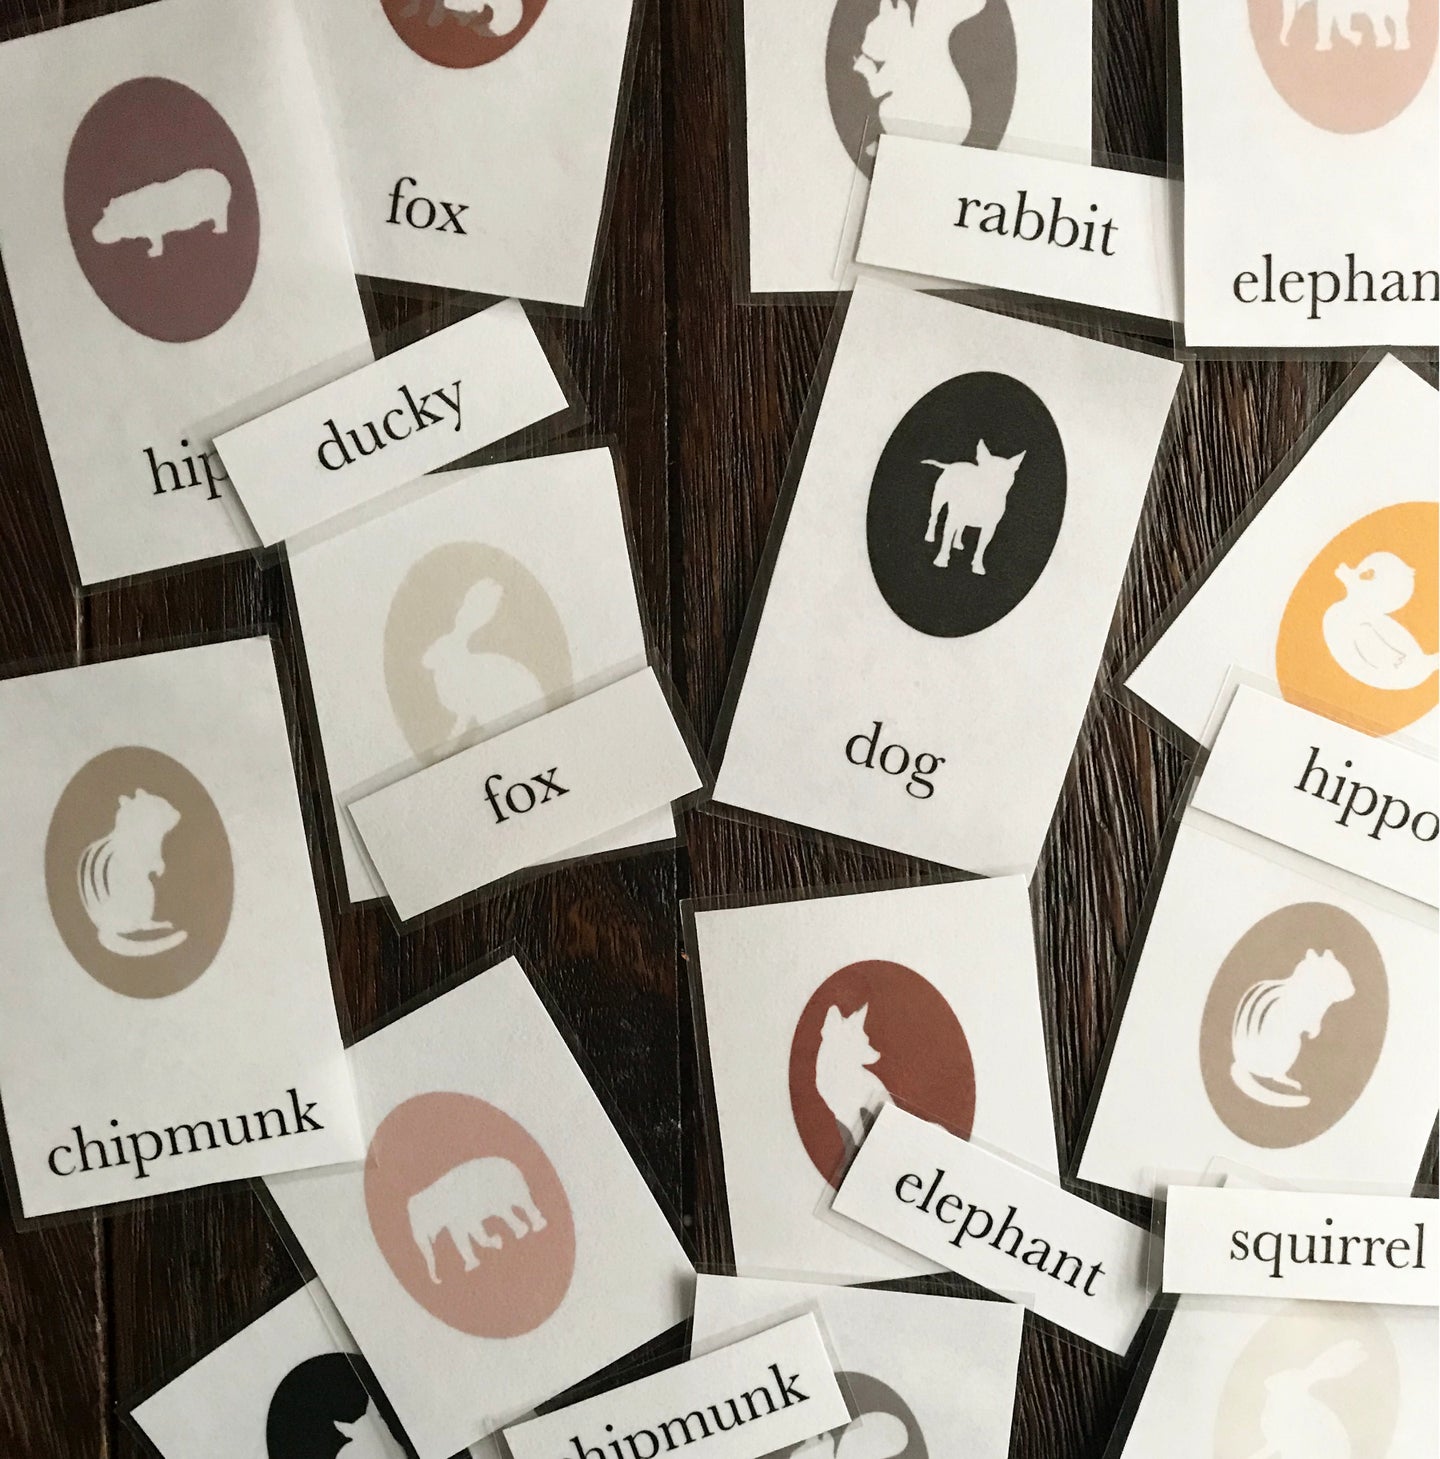 animal cameo flashcards spread out on table